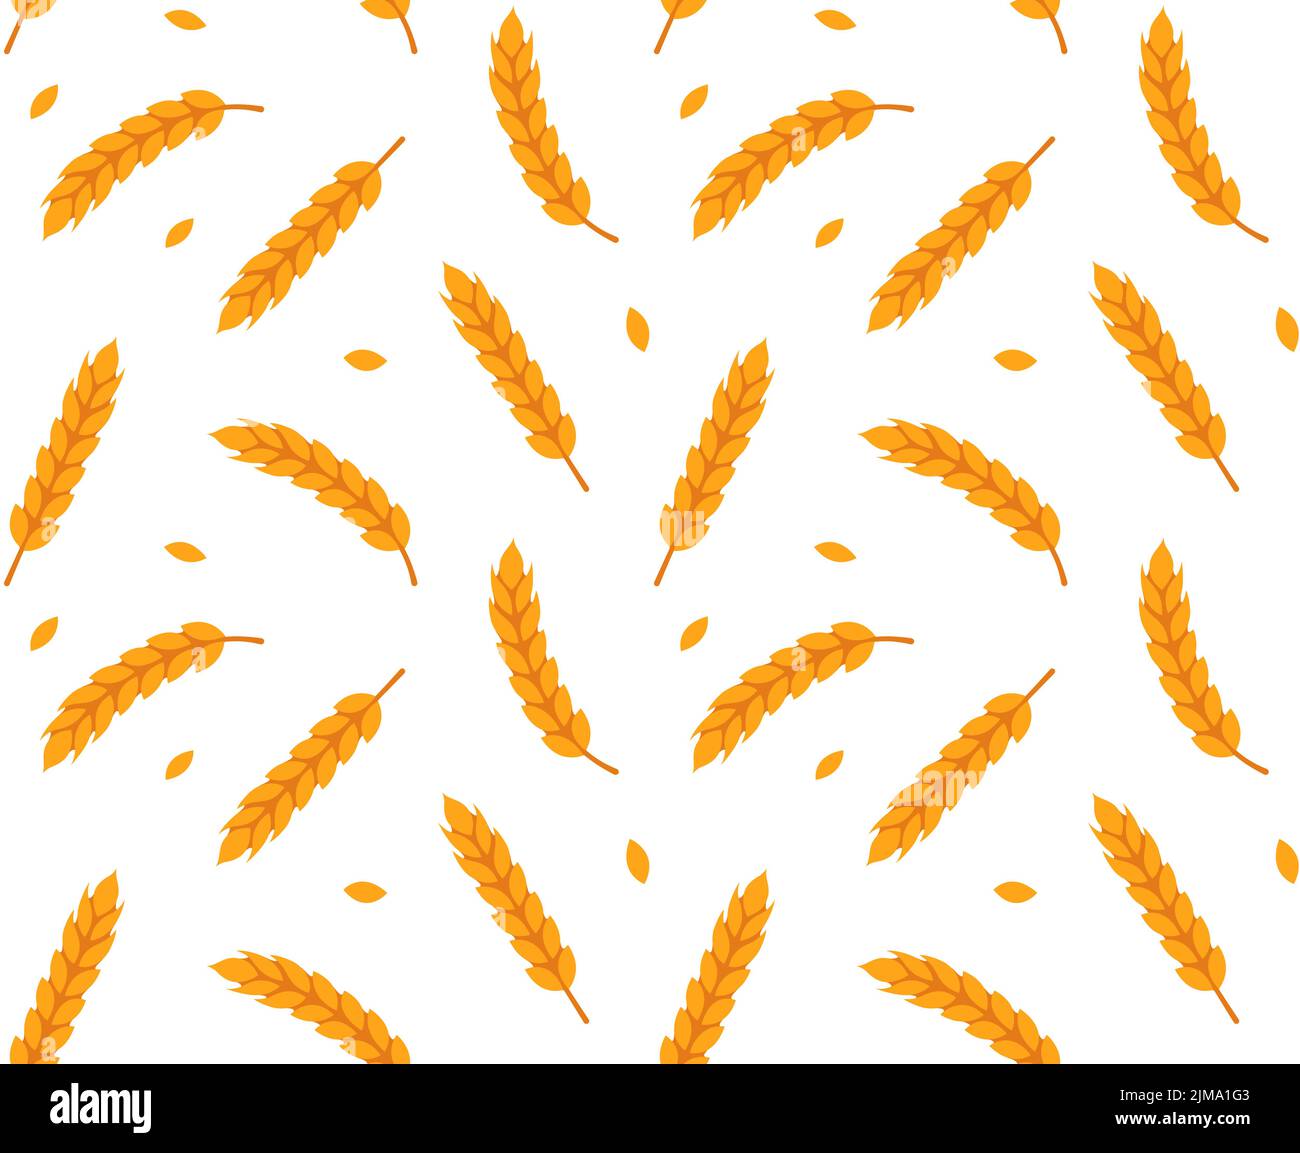 Seamless pattern of ears of wheat. Bread making and crop harvest background. Simple vector cartoon style. Stock Vector